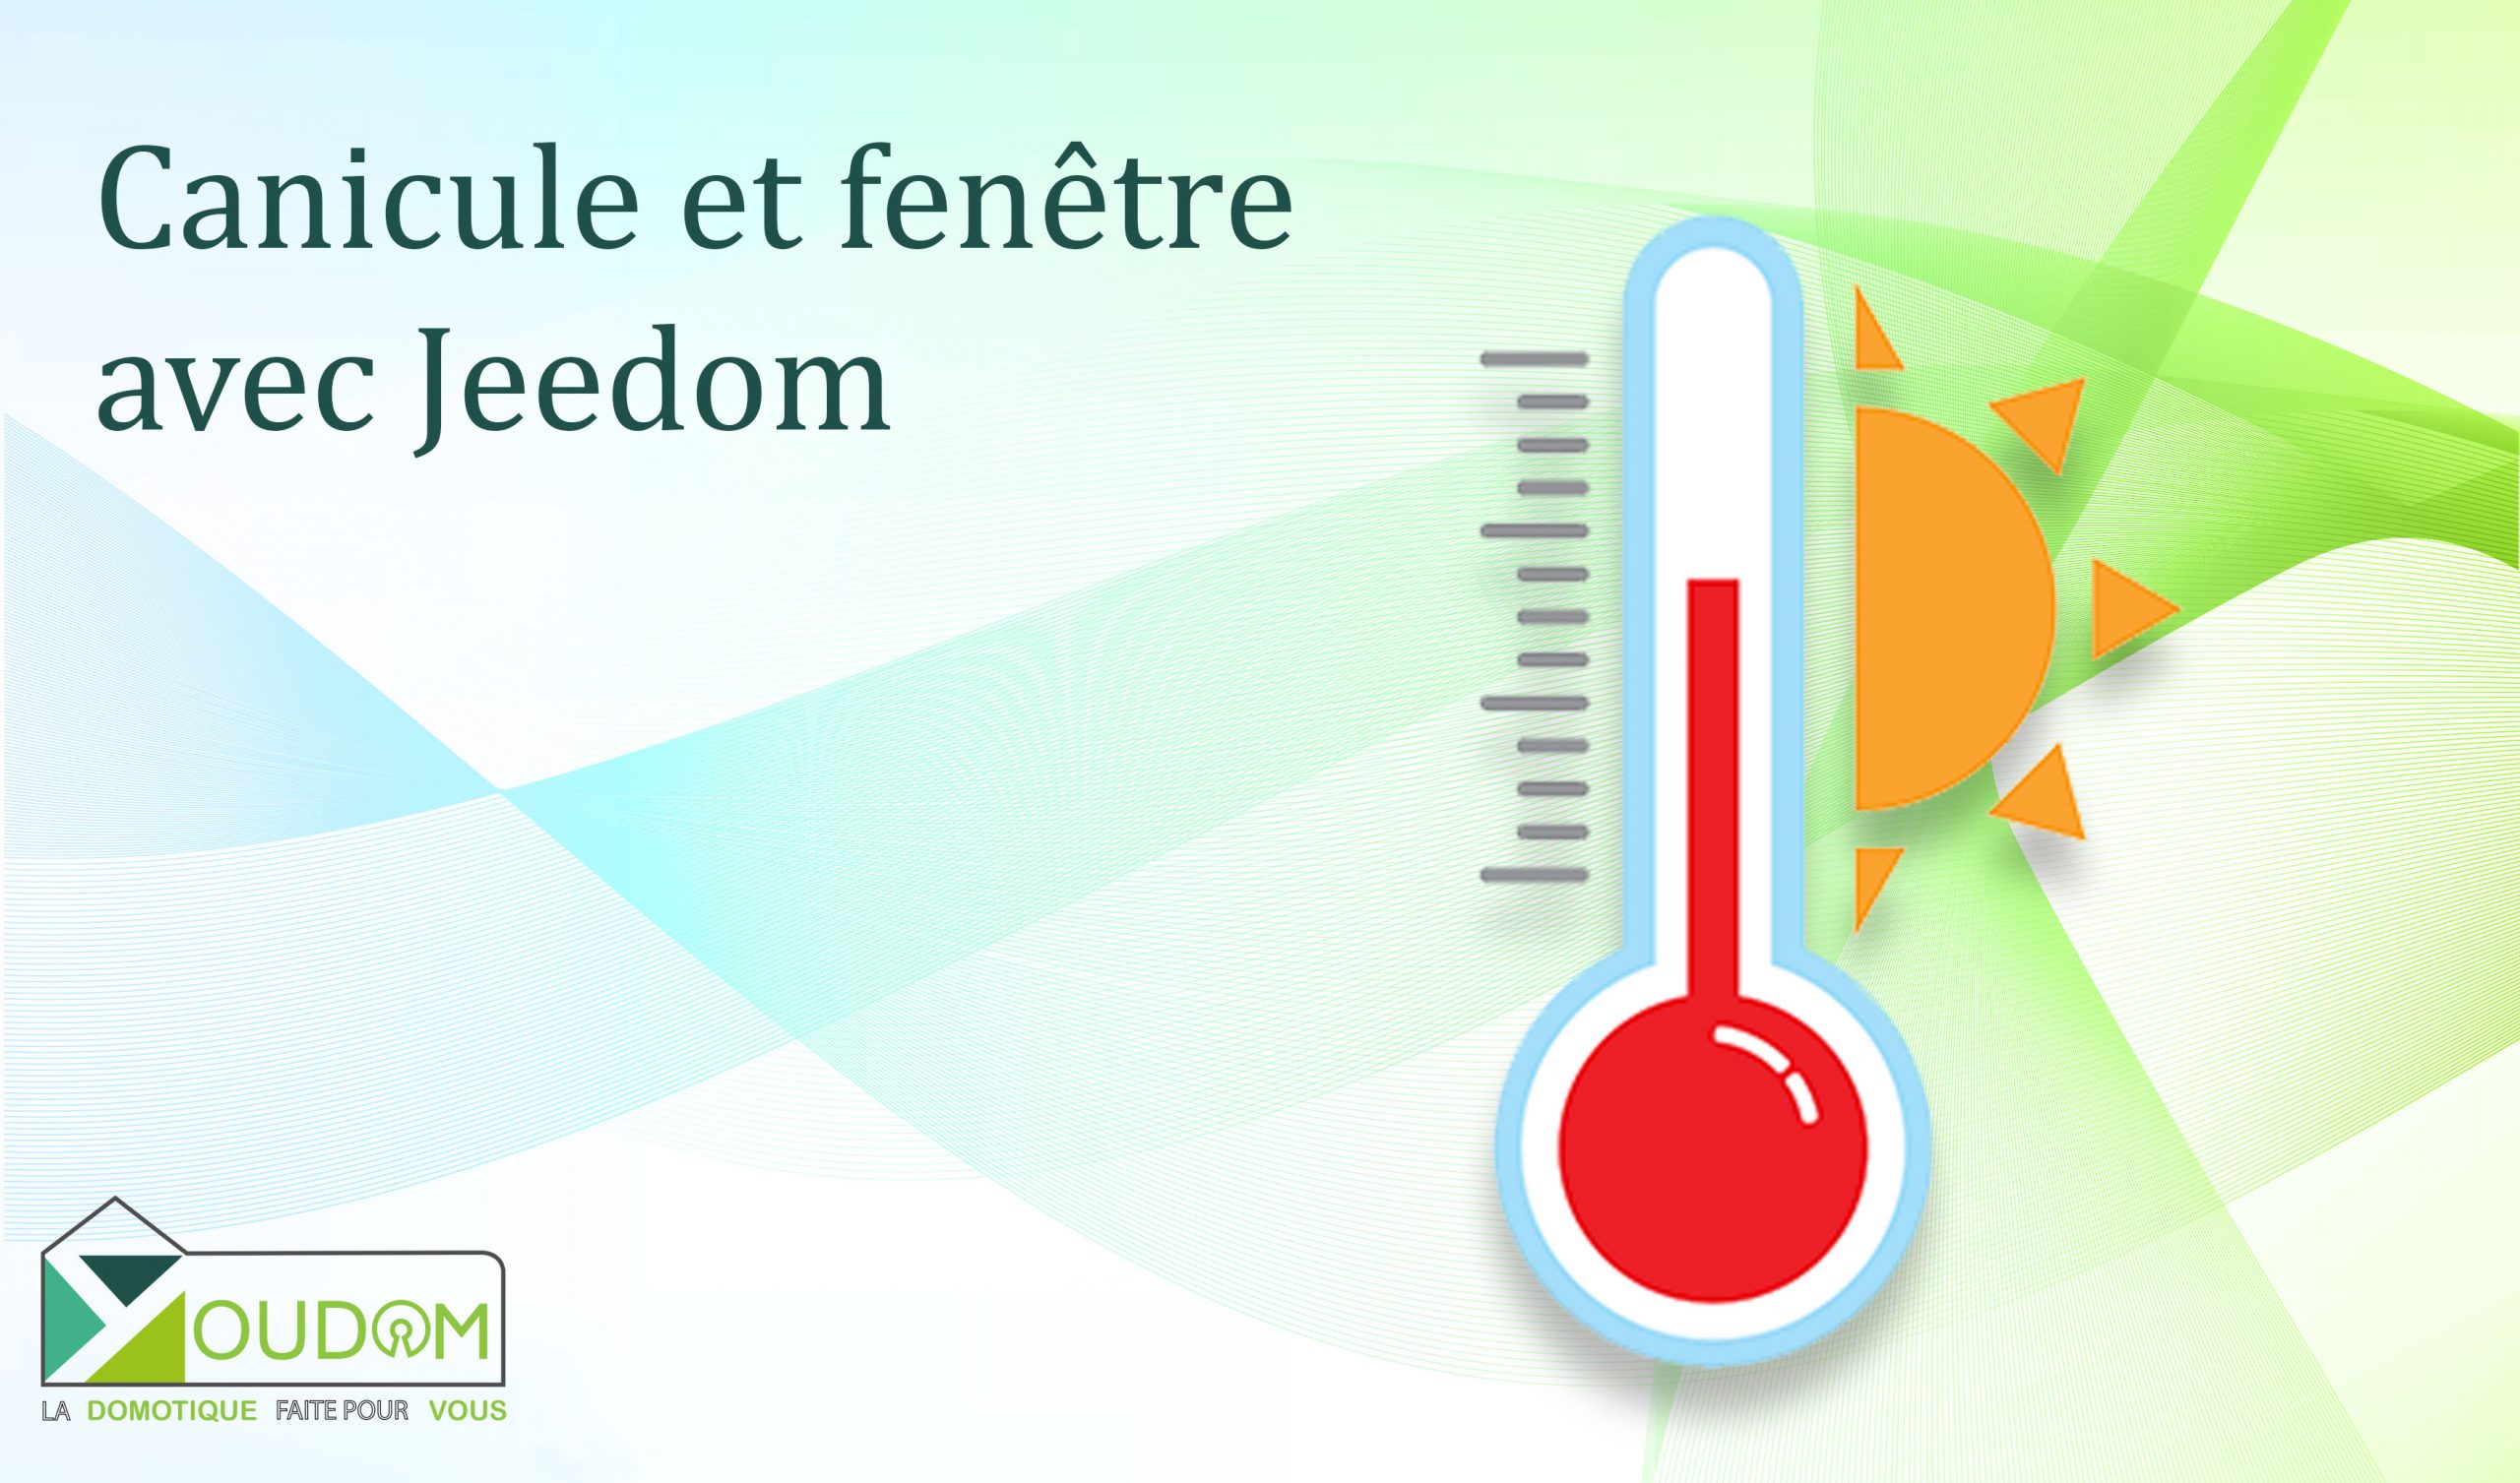 You are currently viewing Canicule et fenêtre avec Jeedom